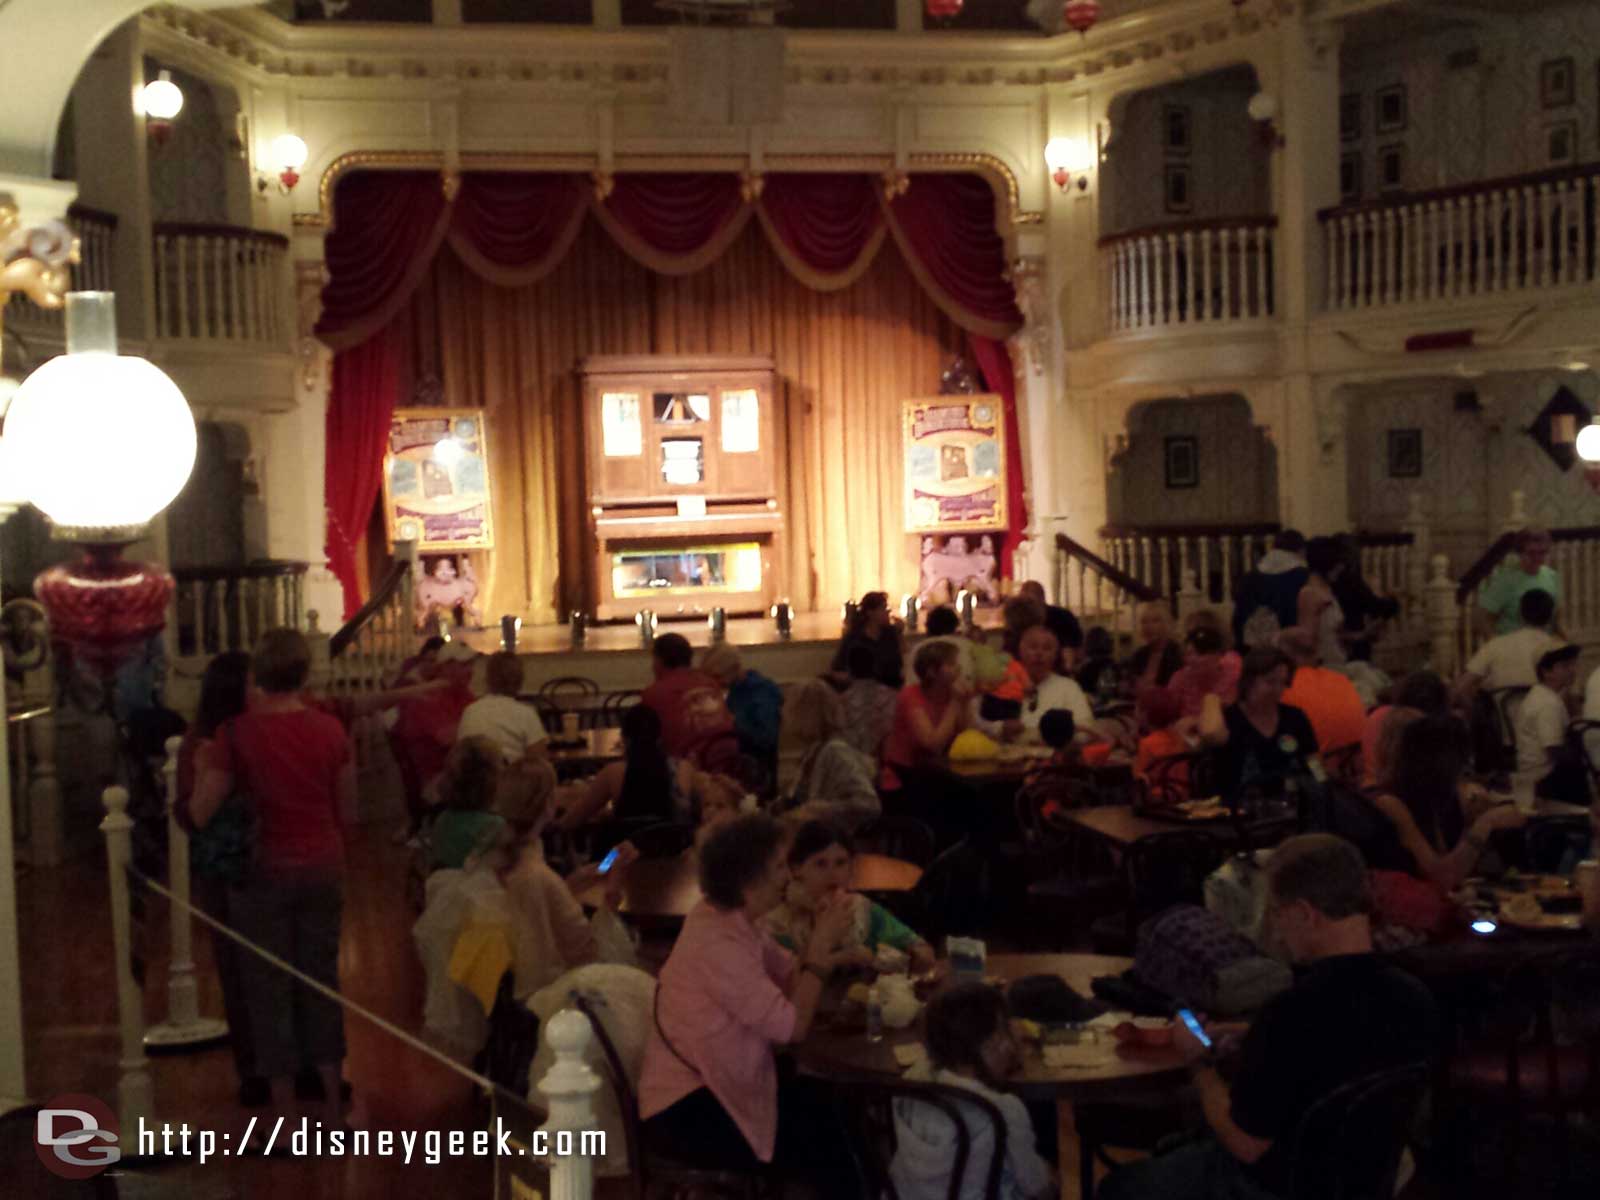 The Diamond Horseshoe was open for lunch today. No entertainment, just lunch.